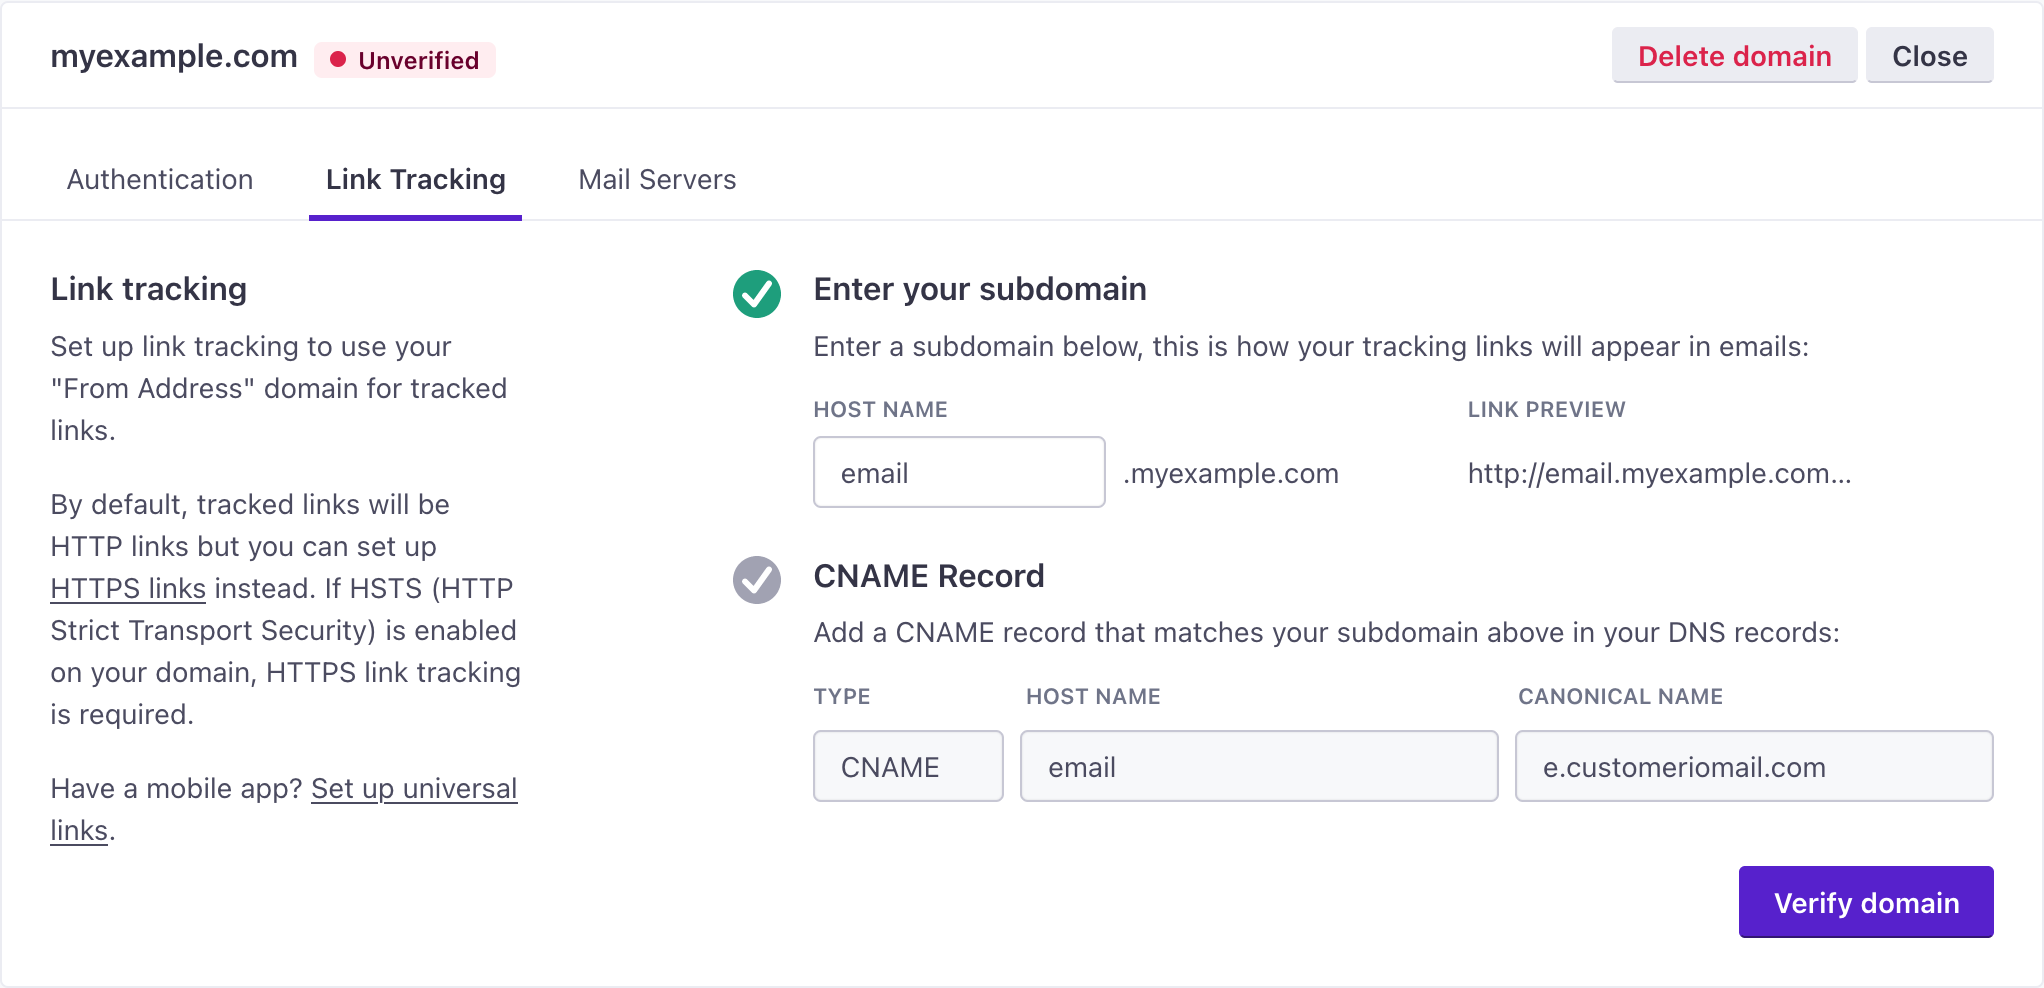 Copy your cname record from Customer.io